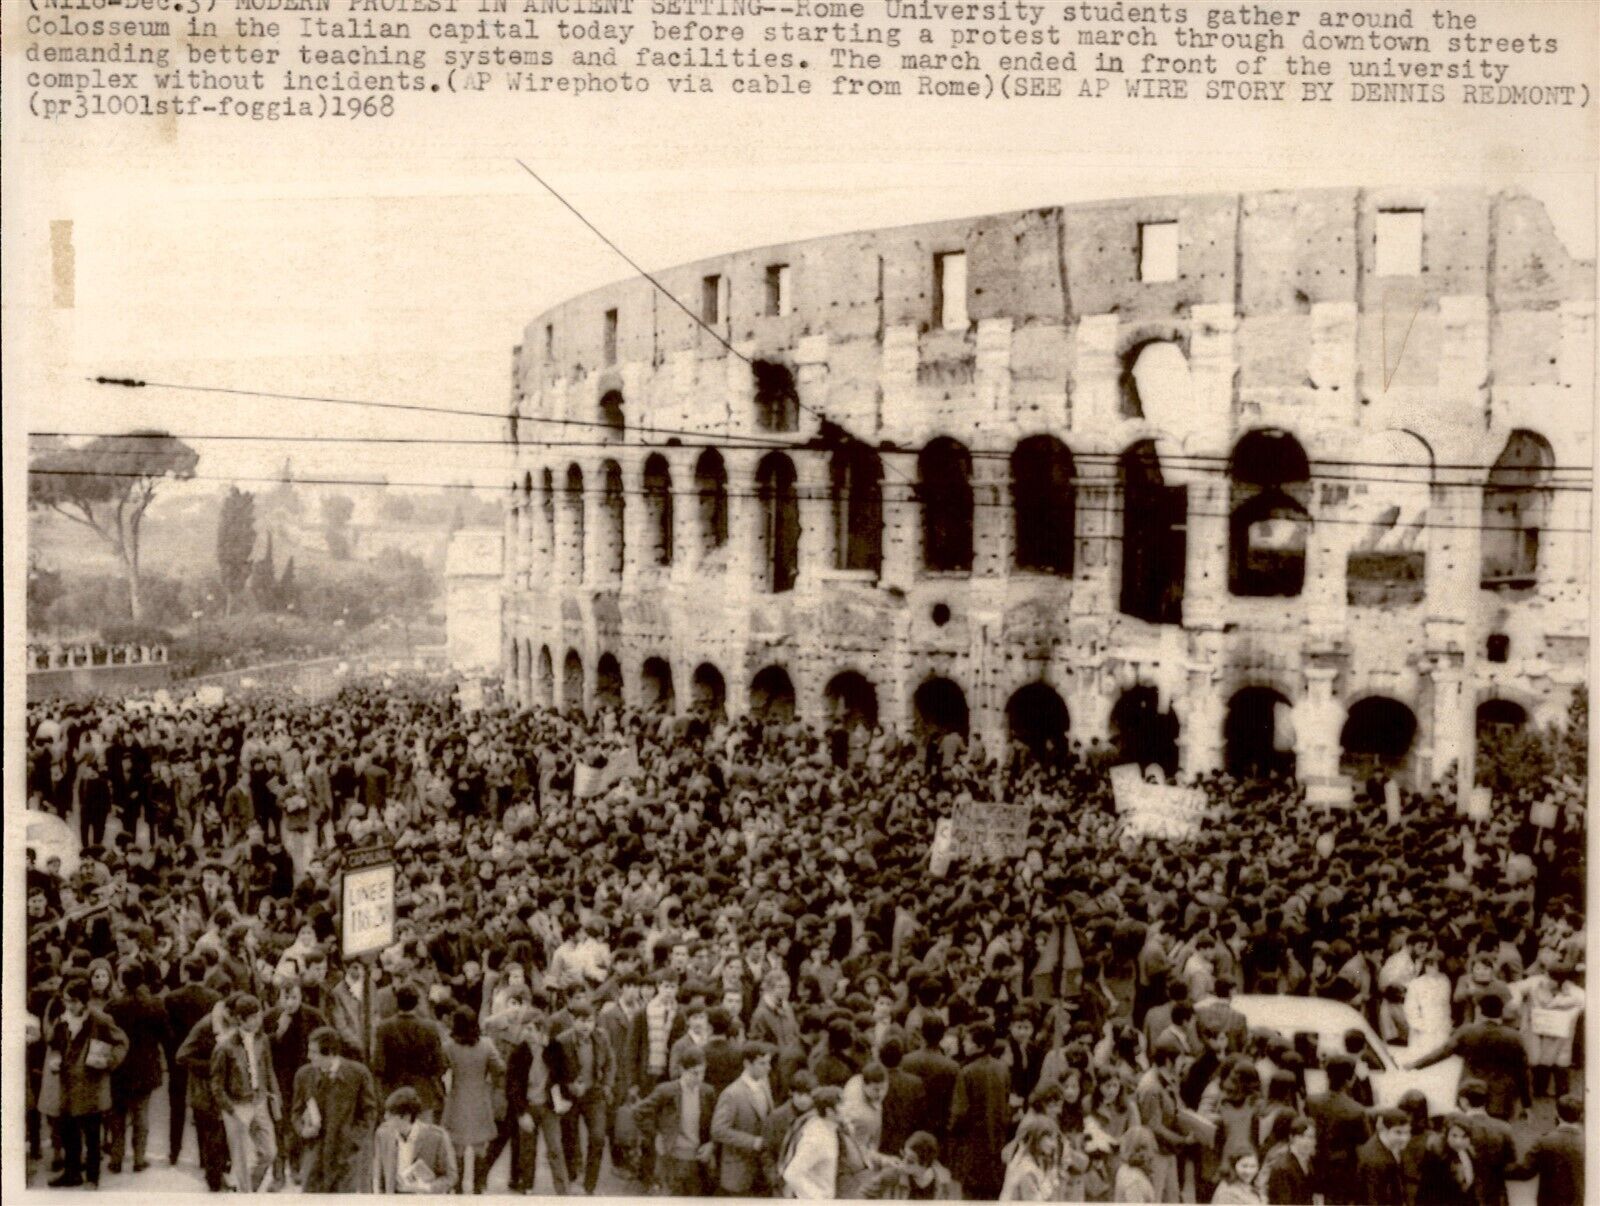 LG2 1968 Wire Photo MODERN PROTEST IN ANCIENT SETTING STUDENTS @ ROME COLOSSEUM